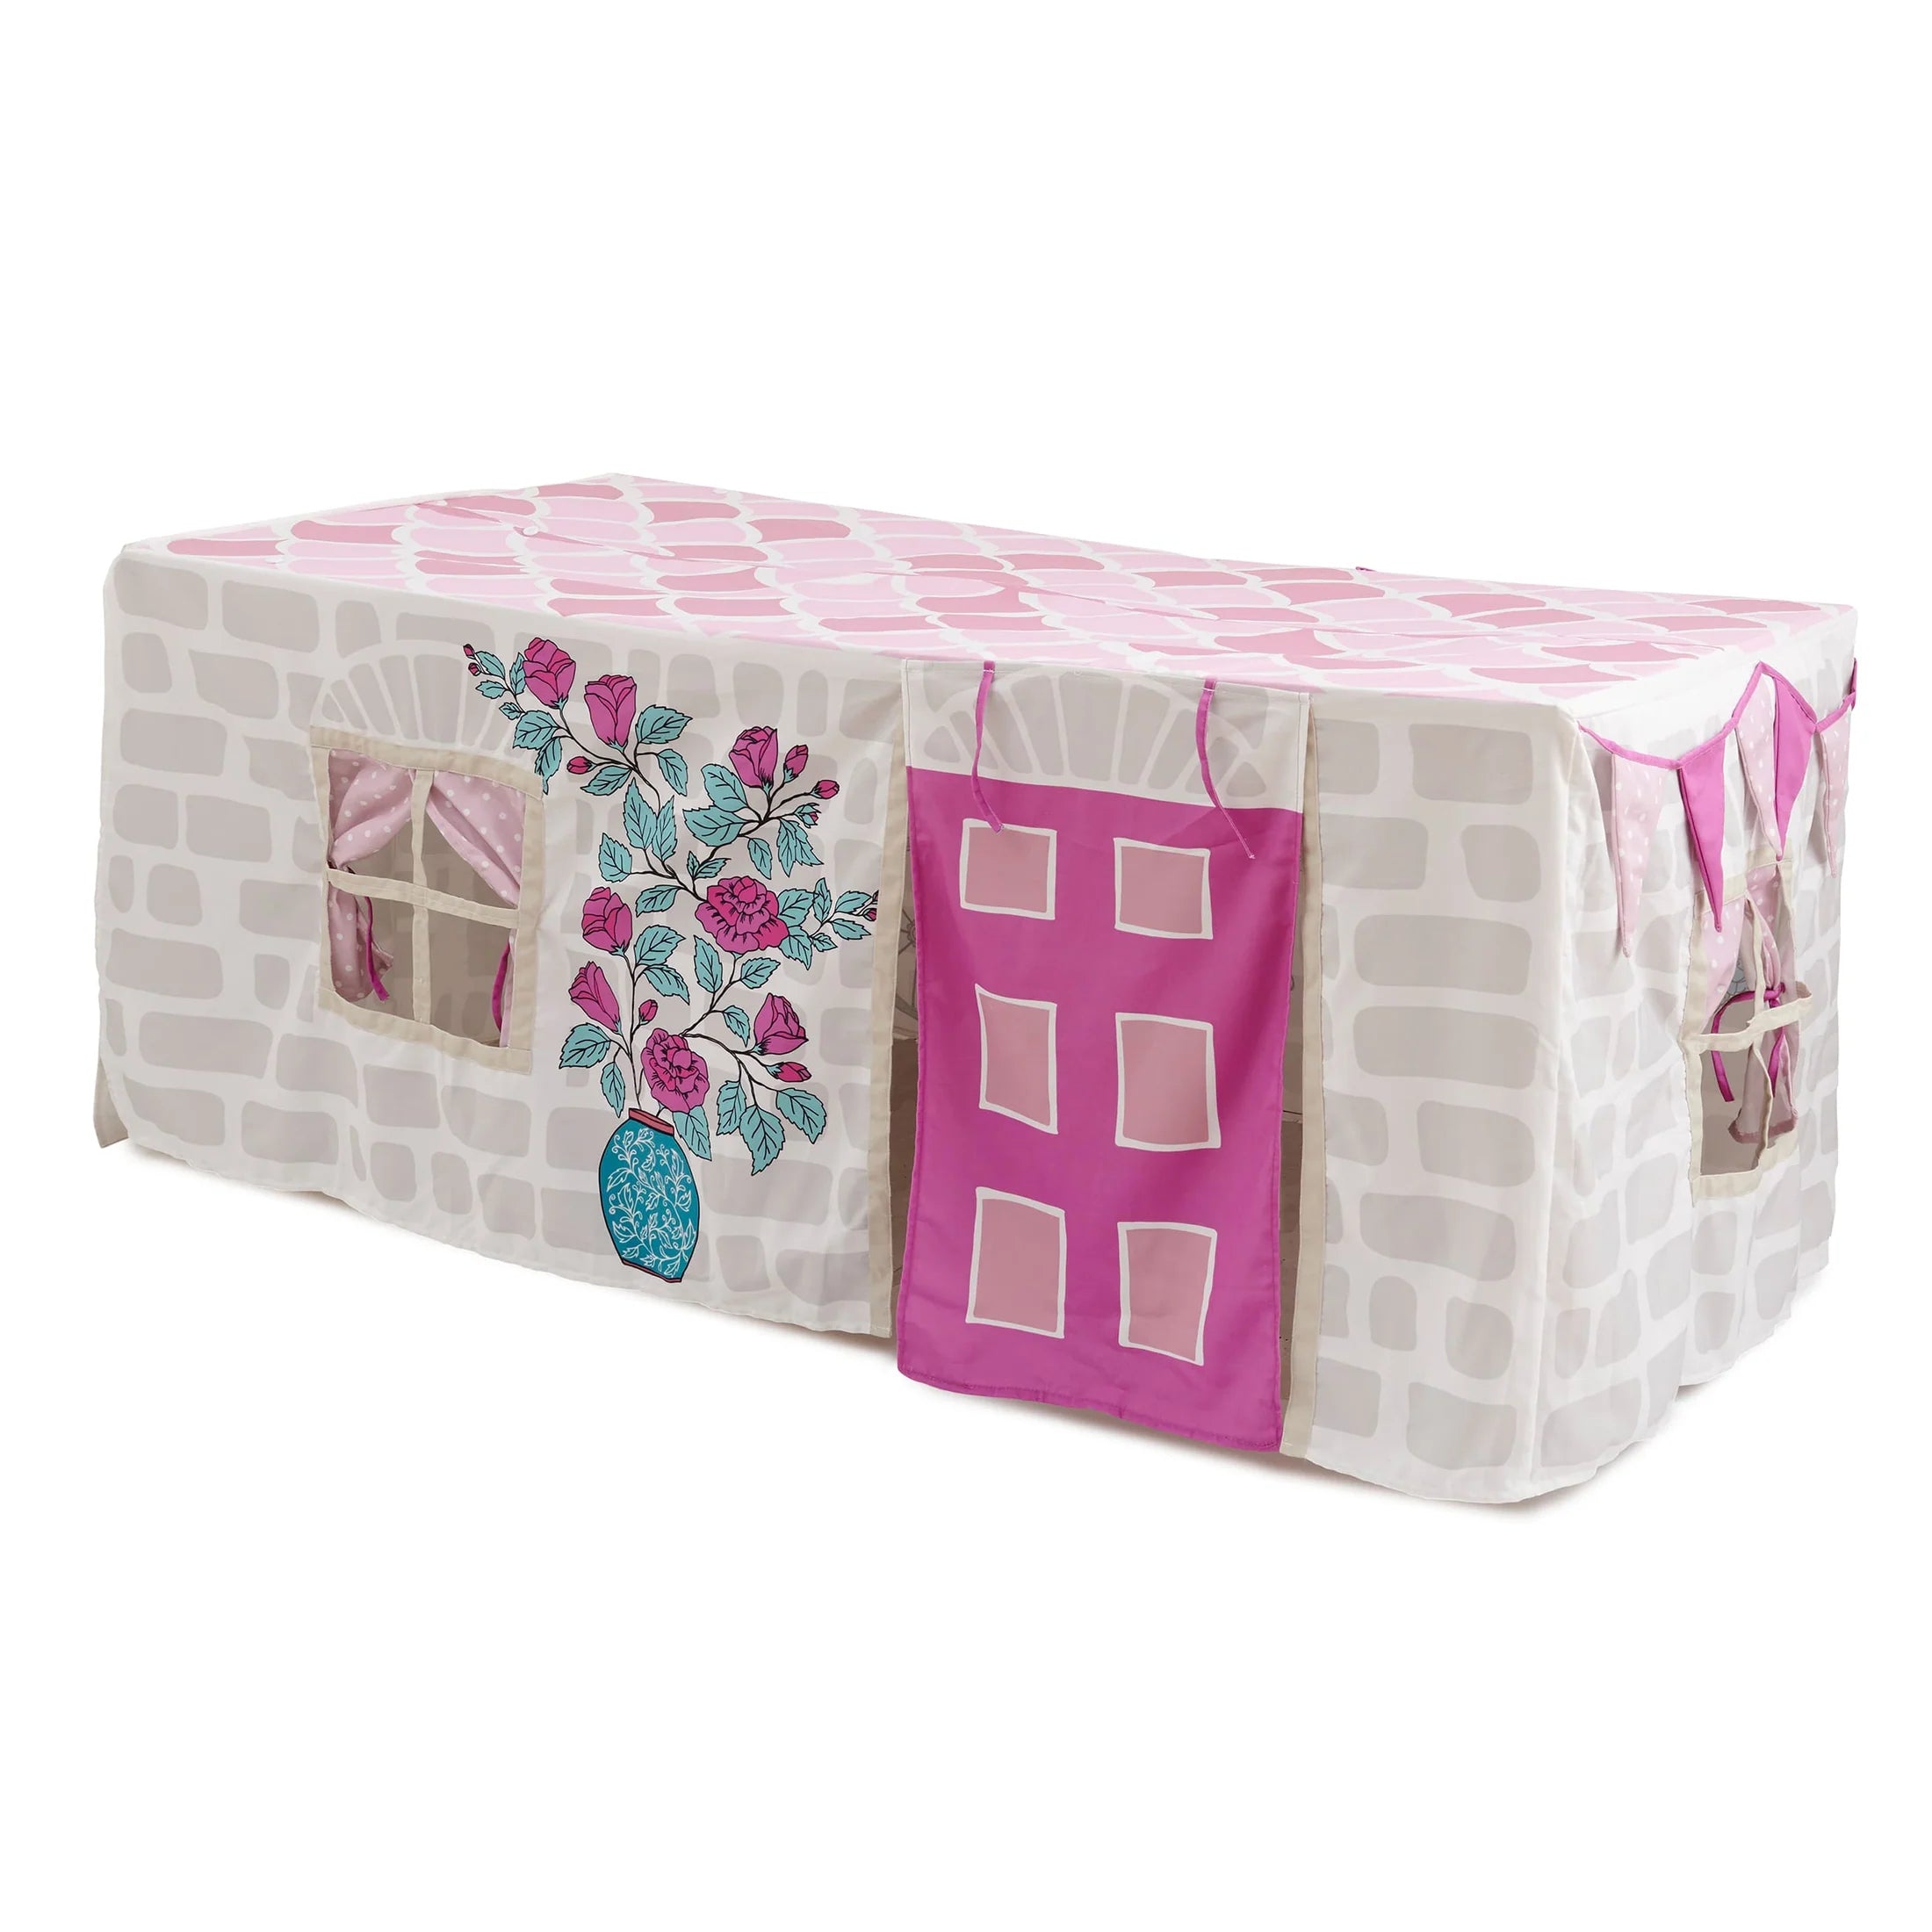 Petite Maison Play - Home Sweet Home Table Tent Cubby